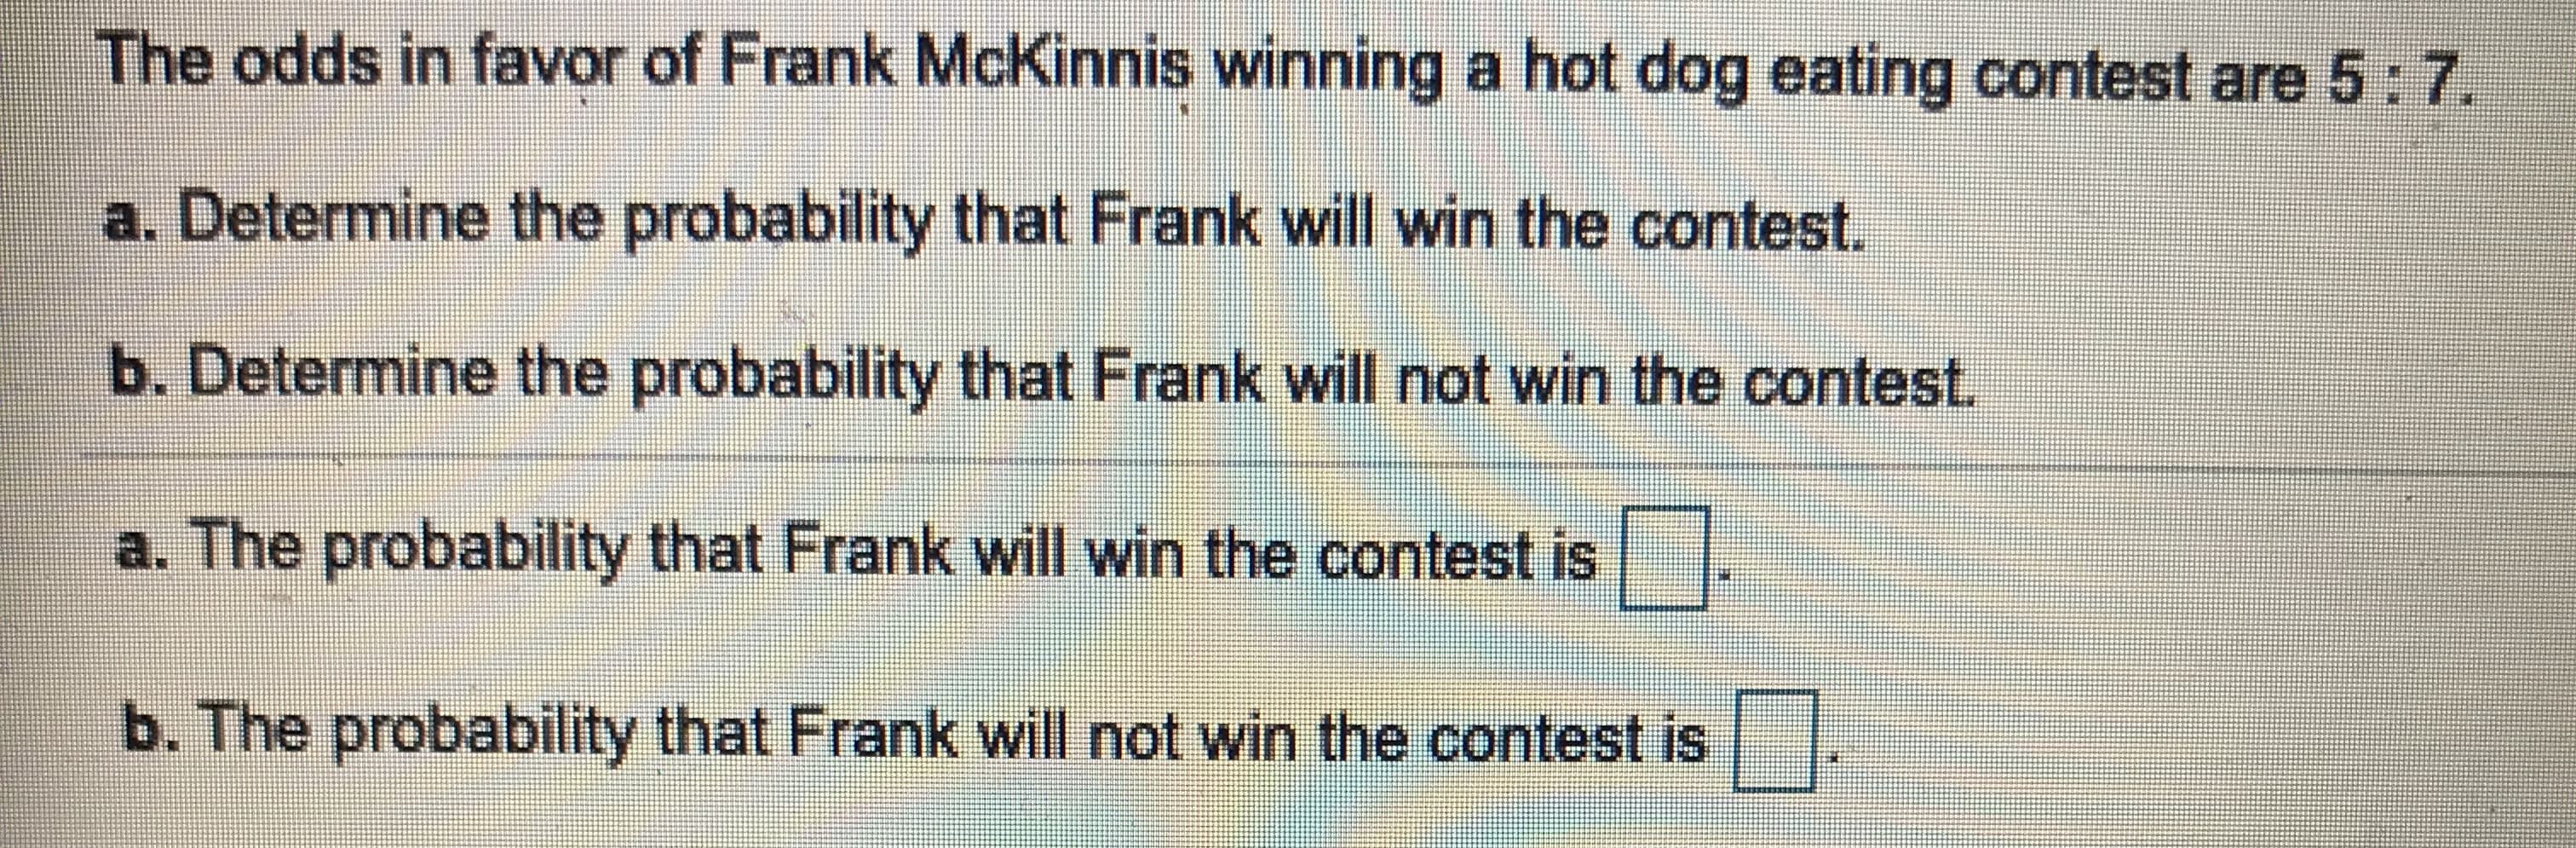 The odds in favor of Frank McKinnis winning a hot dog eating contest are 5:7.
a. Determine the probability that Frank will win the contest.
b. Determine the probability that Frank will not win the contest.
a. The probability that Frank will win the contest is
b. The probability that Frank will not win the contest is
